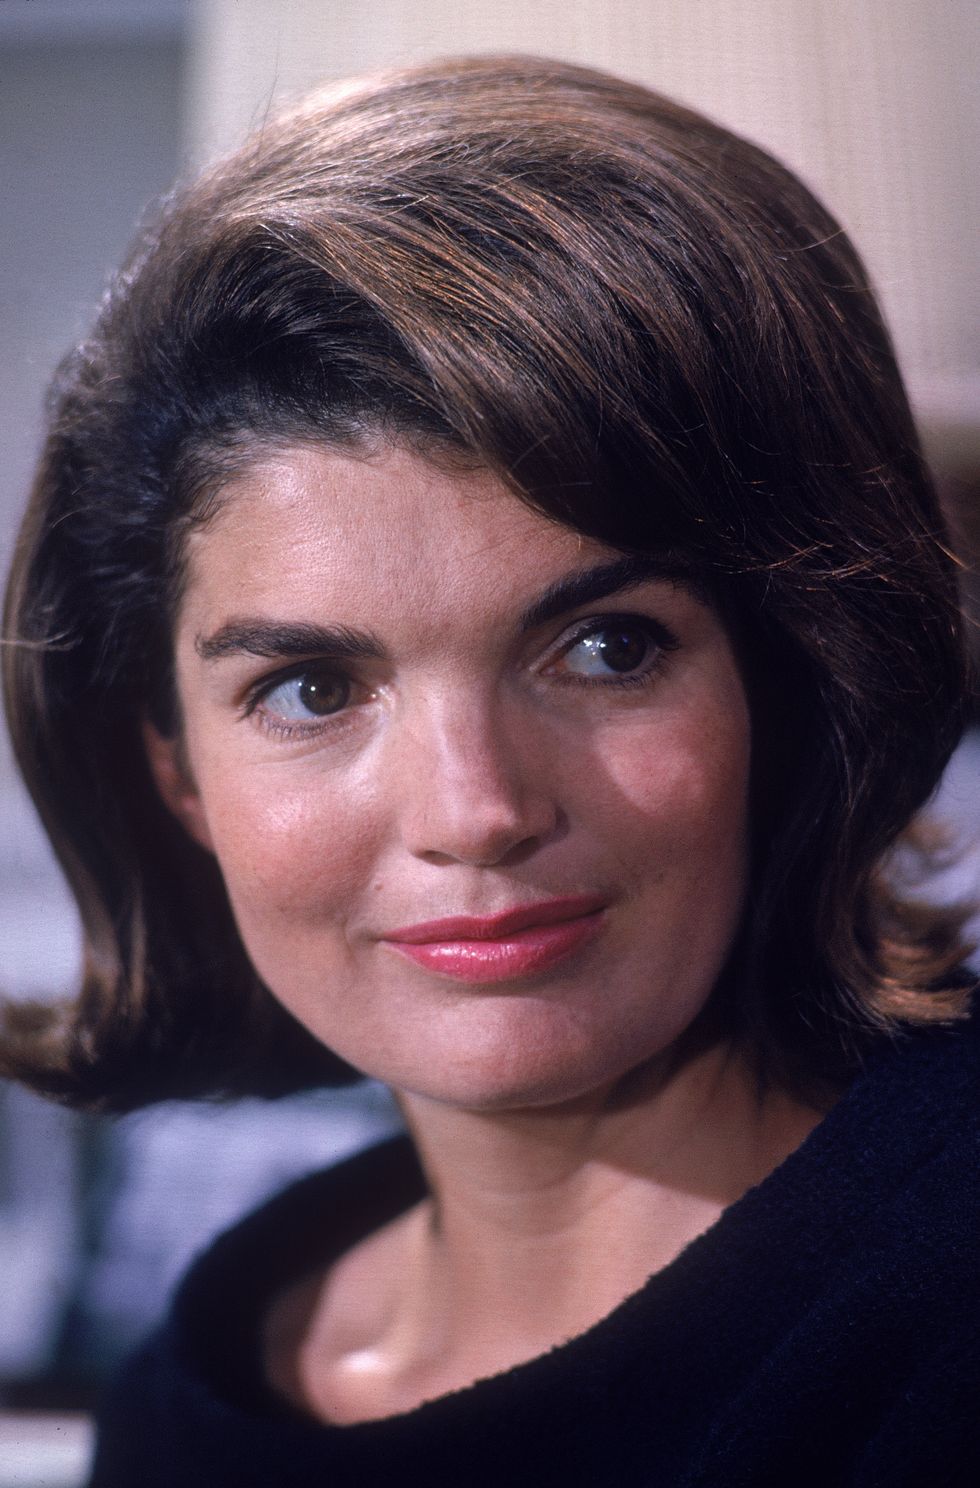 Jacqueline Kennedy photo via Getty Images